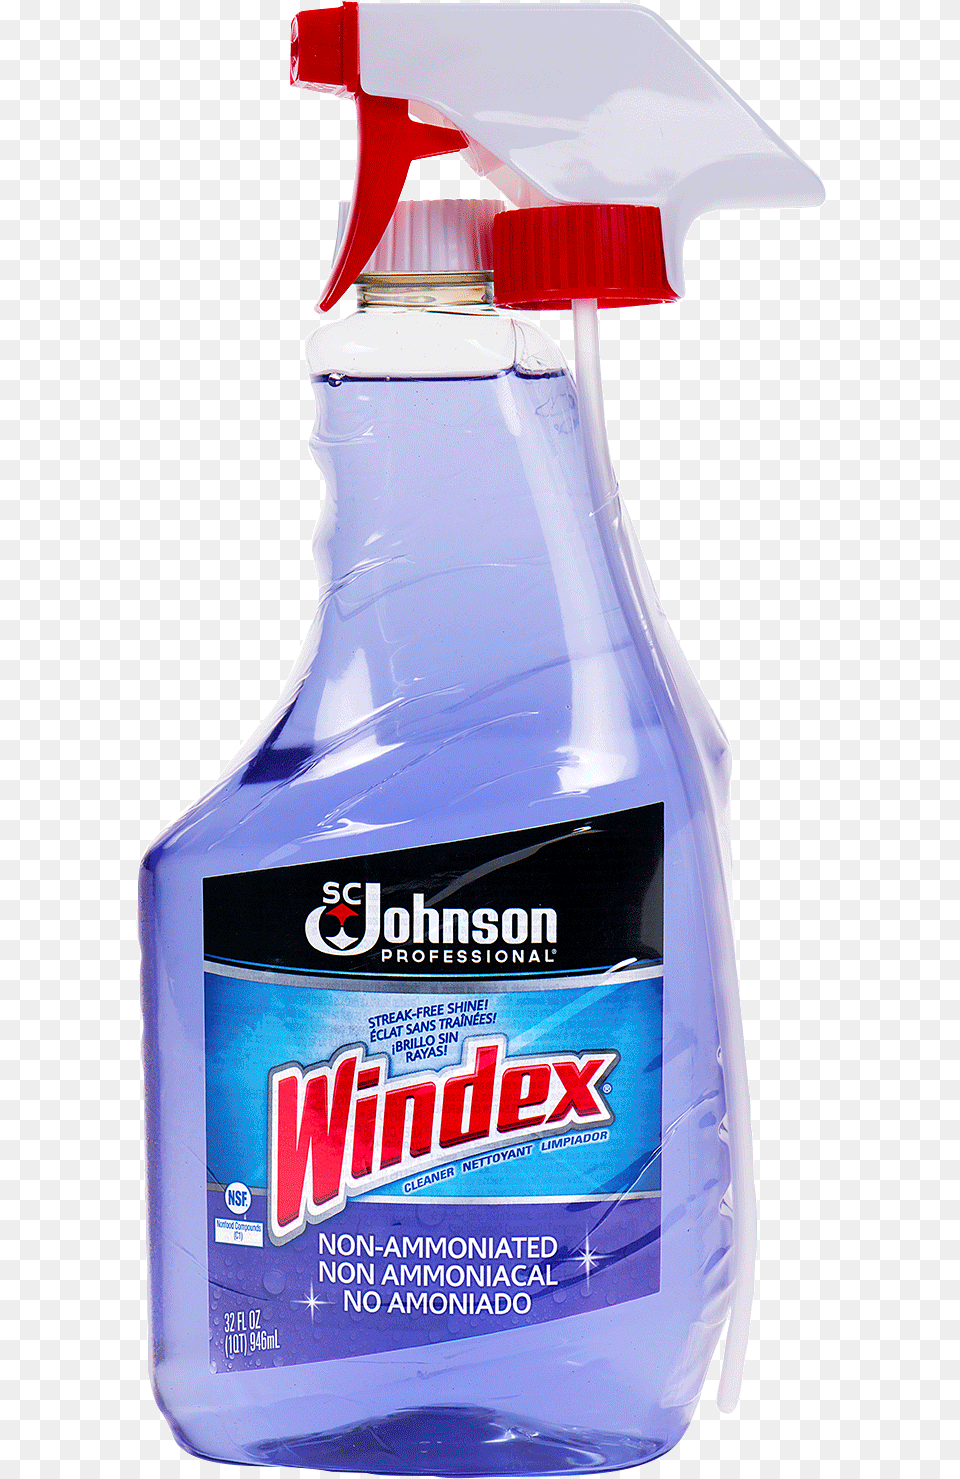 Windex Na Cap Spray1500x1500 Windex Non Ammoniated 32oz Trigger, Cleaning, Person, Bottle Free Png Download